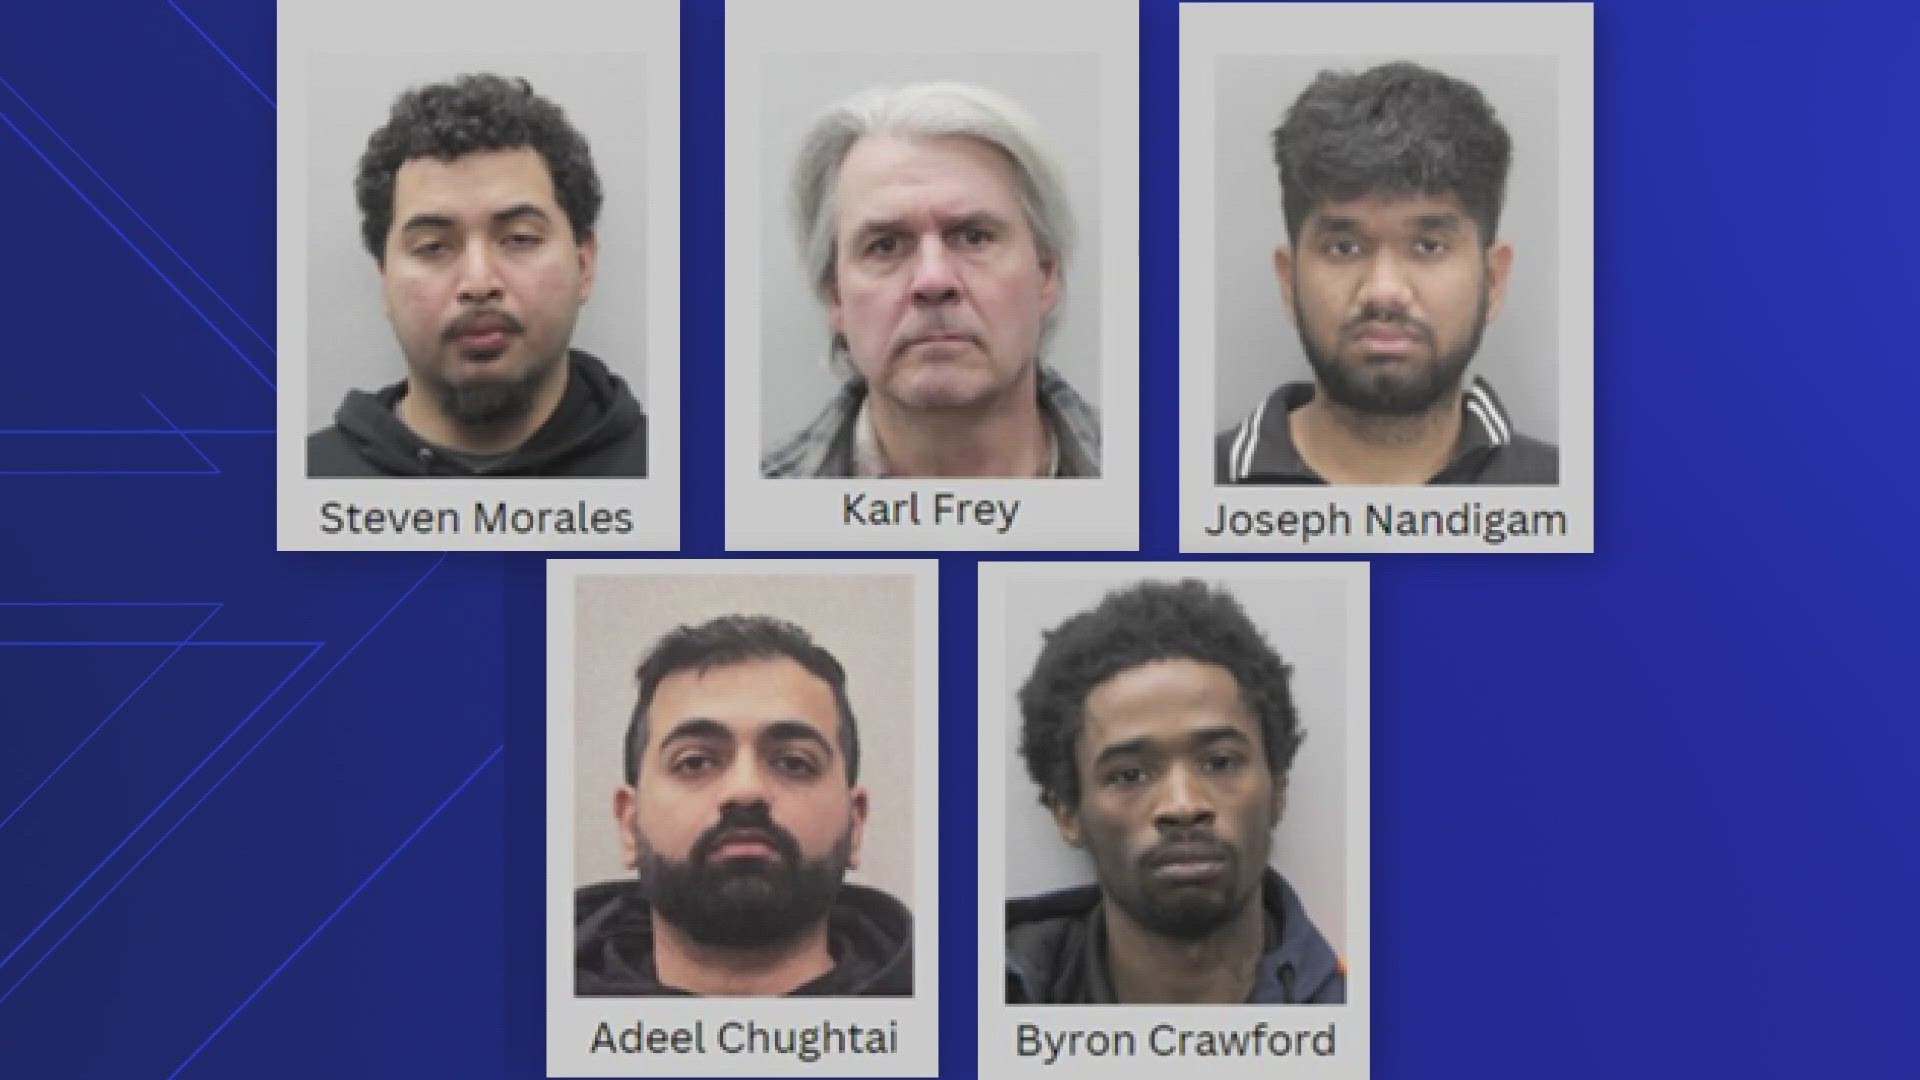 The men are facing a total of 12 felonies charges.